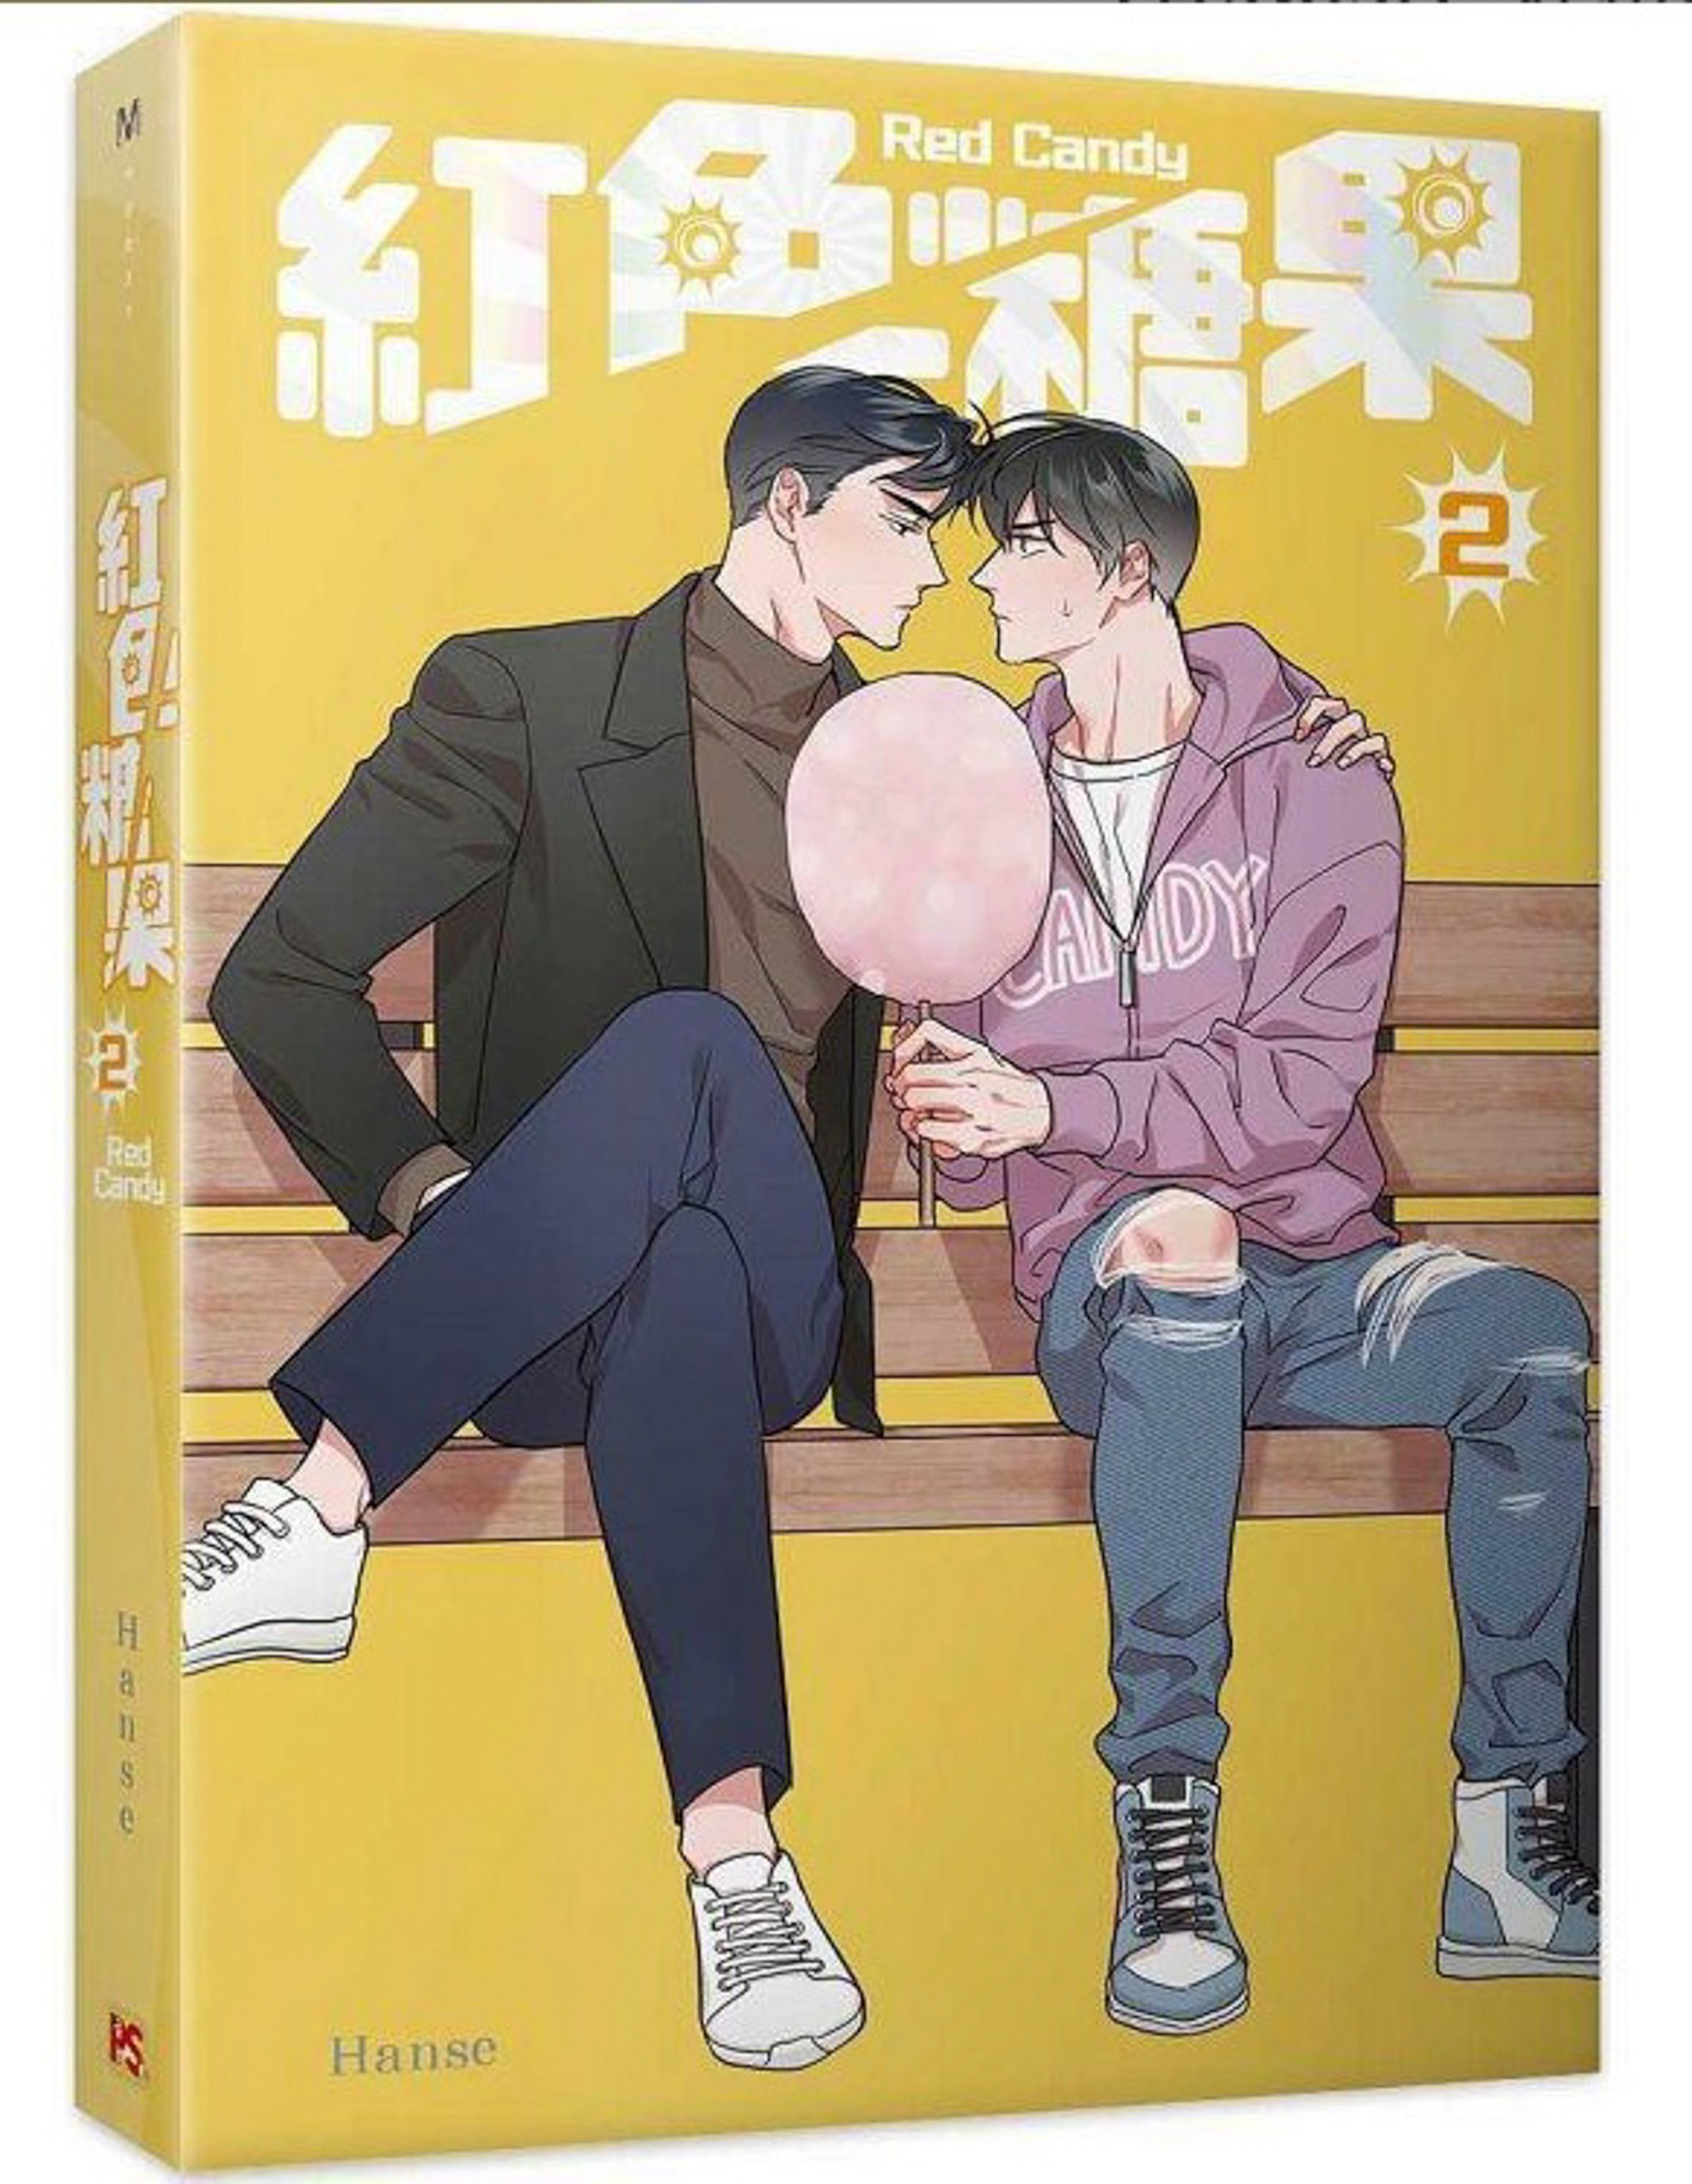 Red Candy, a boys’ love story, sold by the Fu Court bookstore/cafe in Mong Kok, a haven for Hong Kong fans of the genre of romantic fiction. 